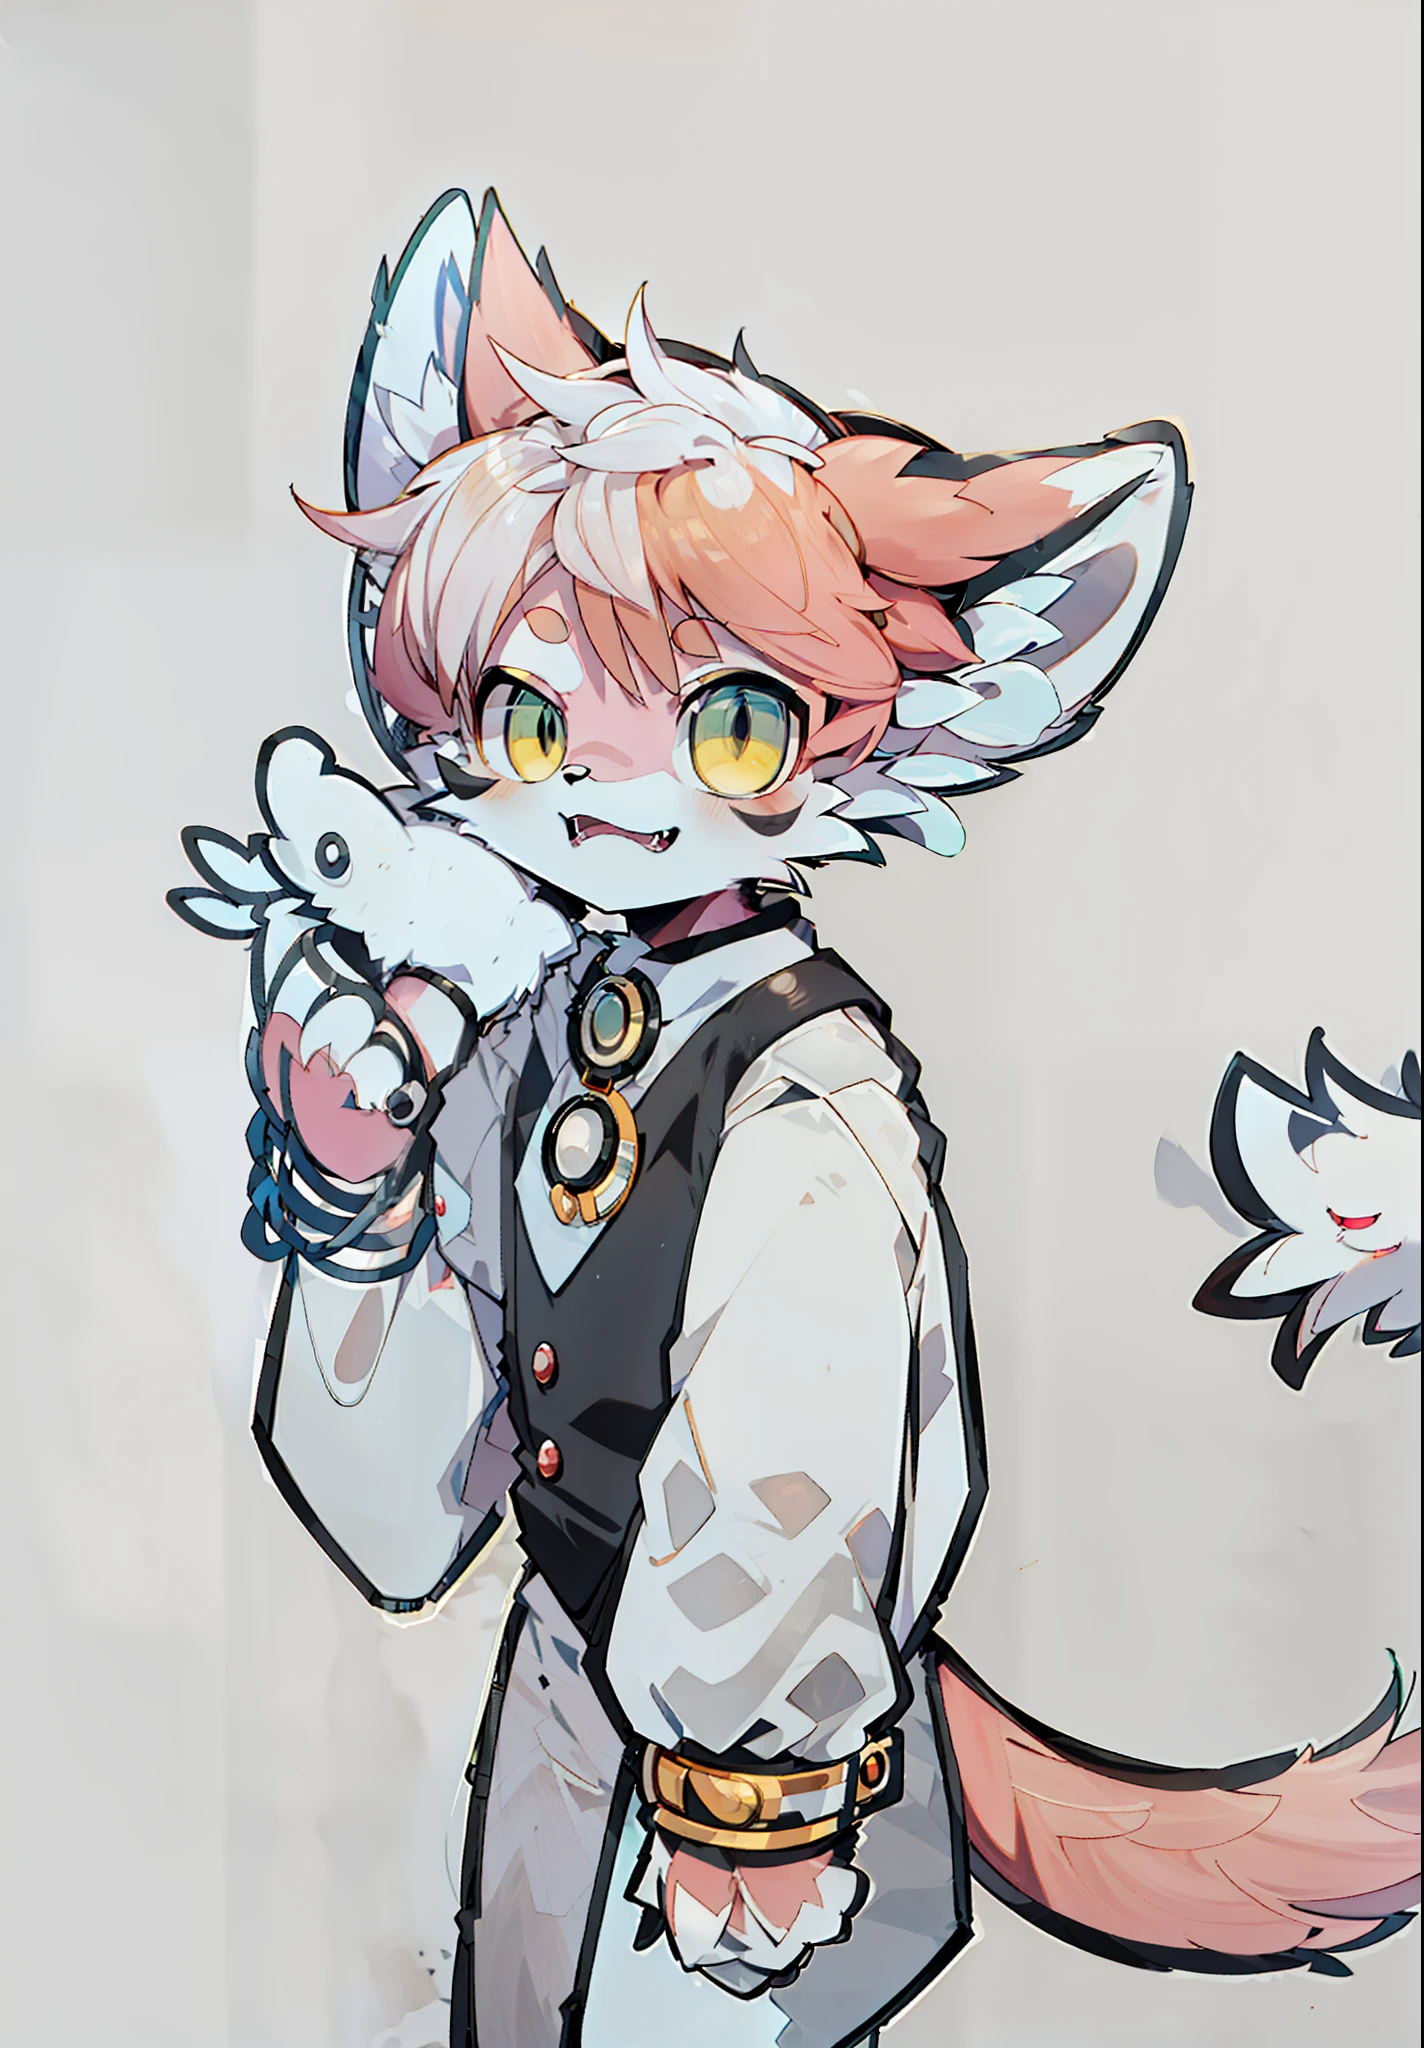 Draw a girl with pink hair and a black vest holding a bird, professional furry drawing, anthropomorphic fox, Anthropomorphic fox, a fox, portrait of an anthro fox, Pink fox, fursona art, tonic the fox, fursona!!!!, Furry character, Furry art!!!, fursona commission, furry fursona